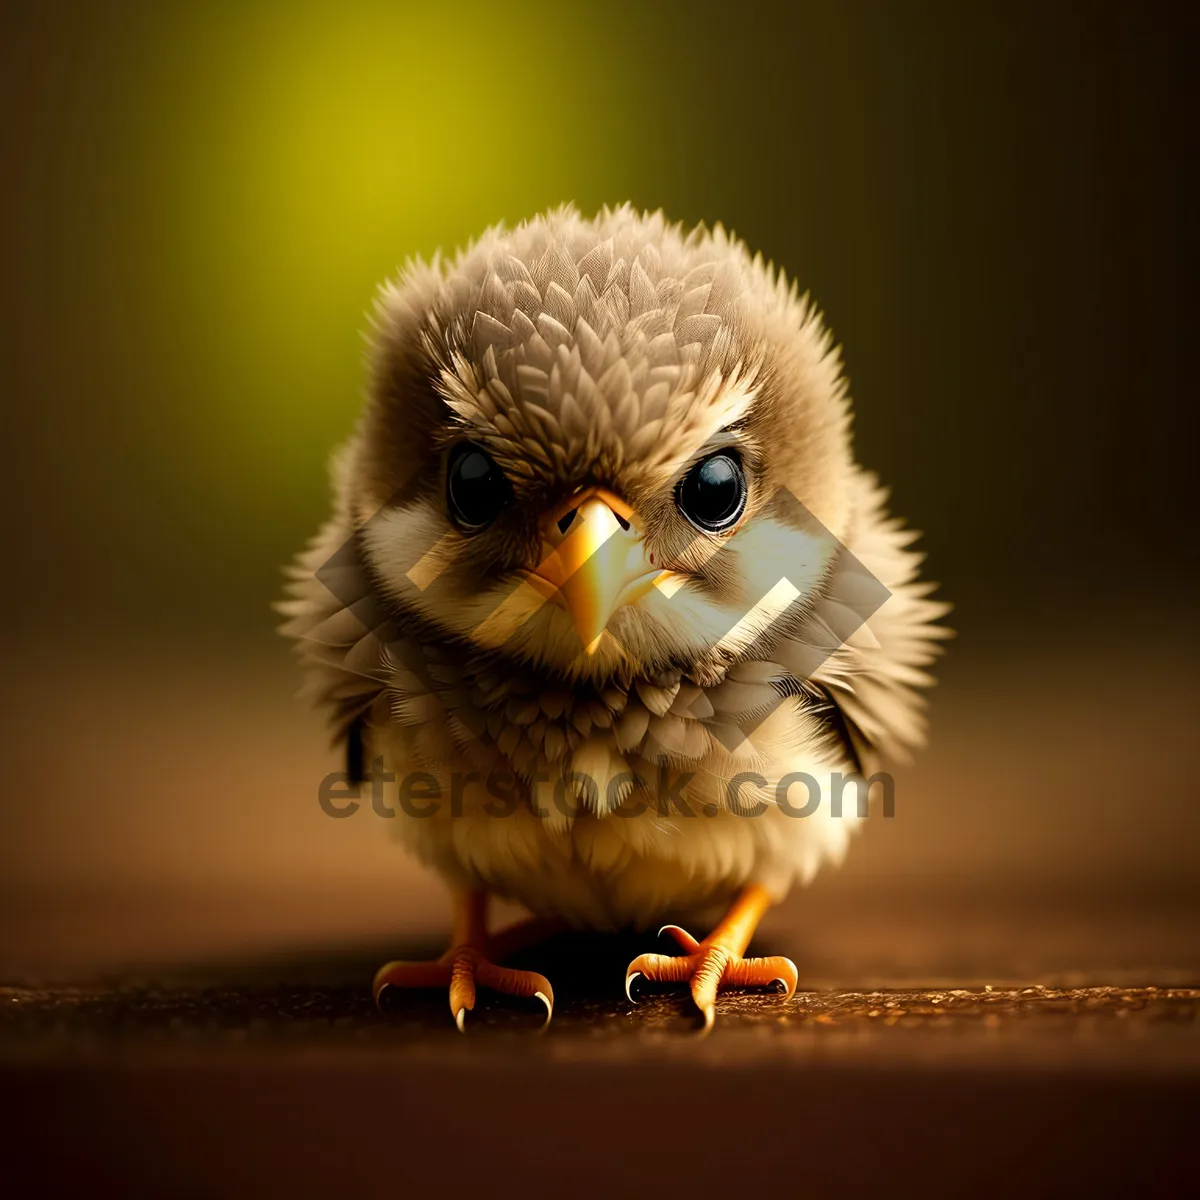 Picture of Fuzzy Newborn Chick with Fluffy Yellow Feathers